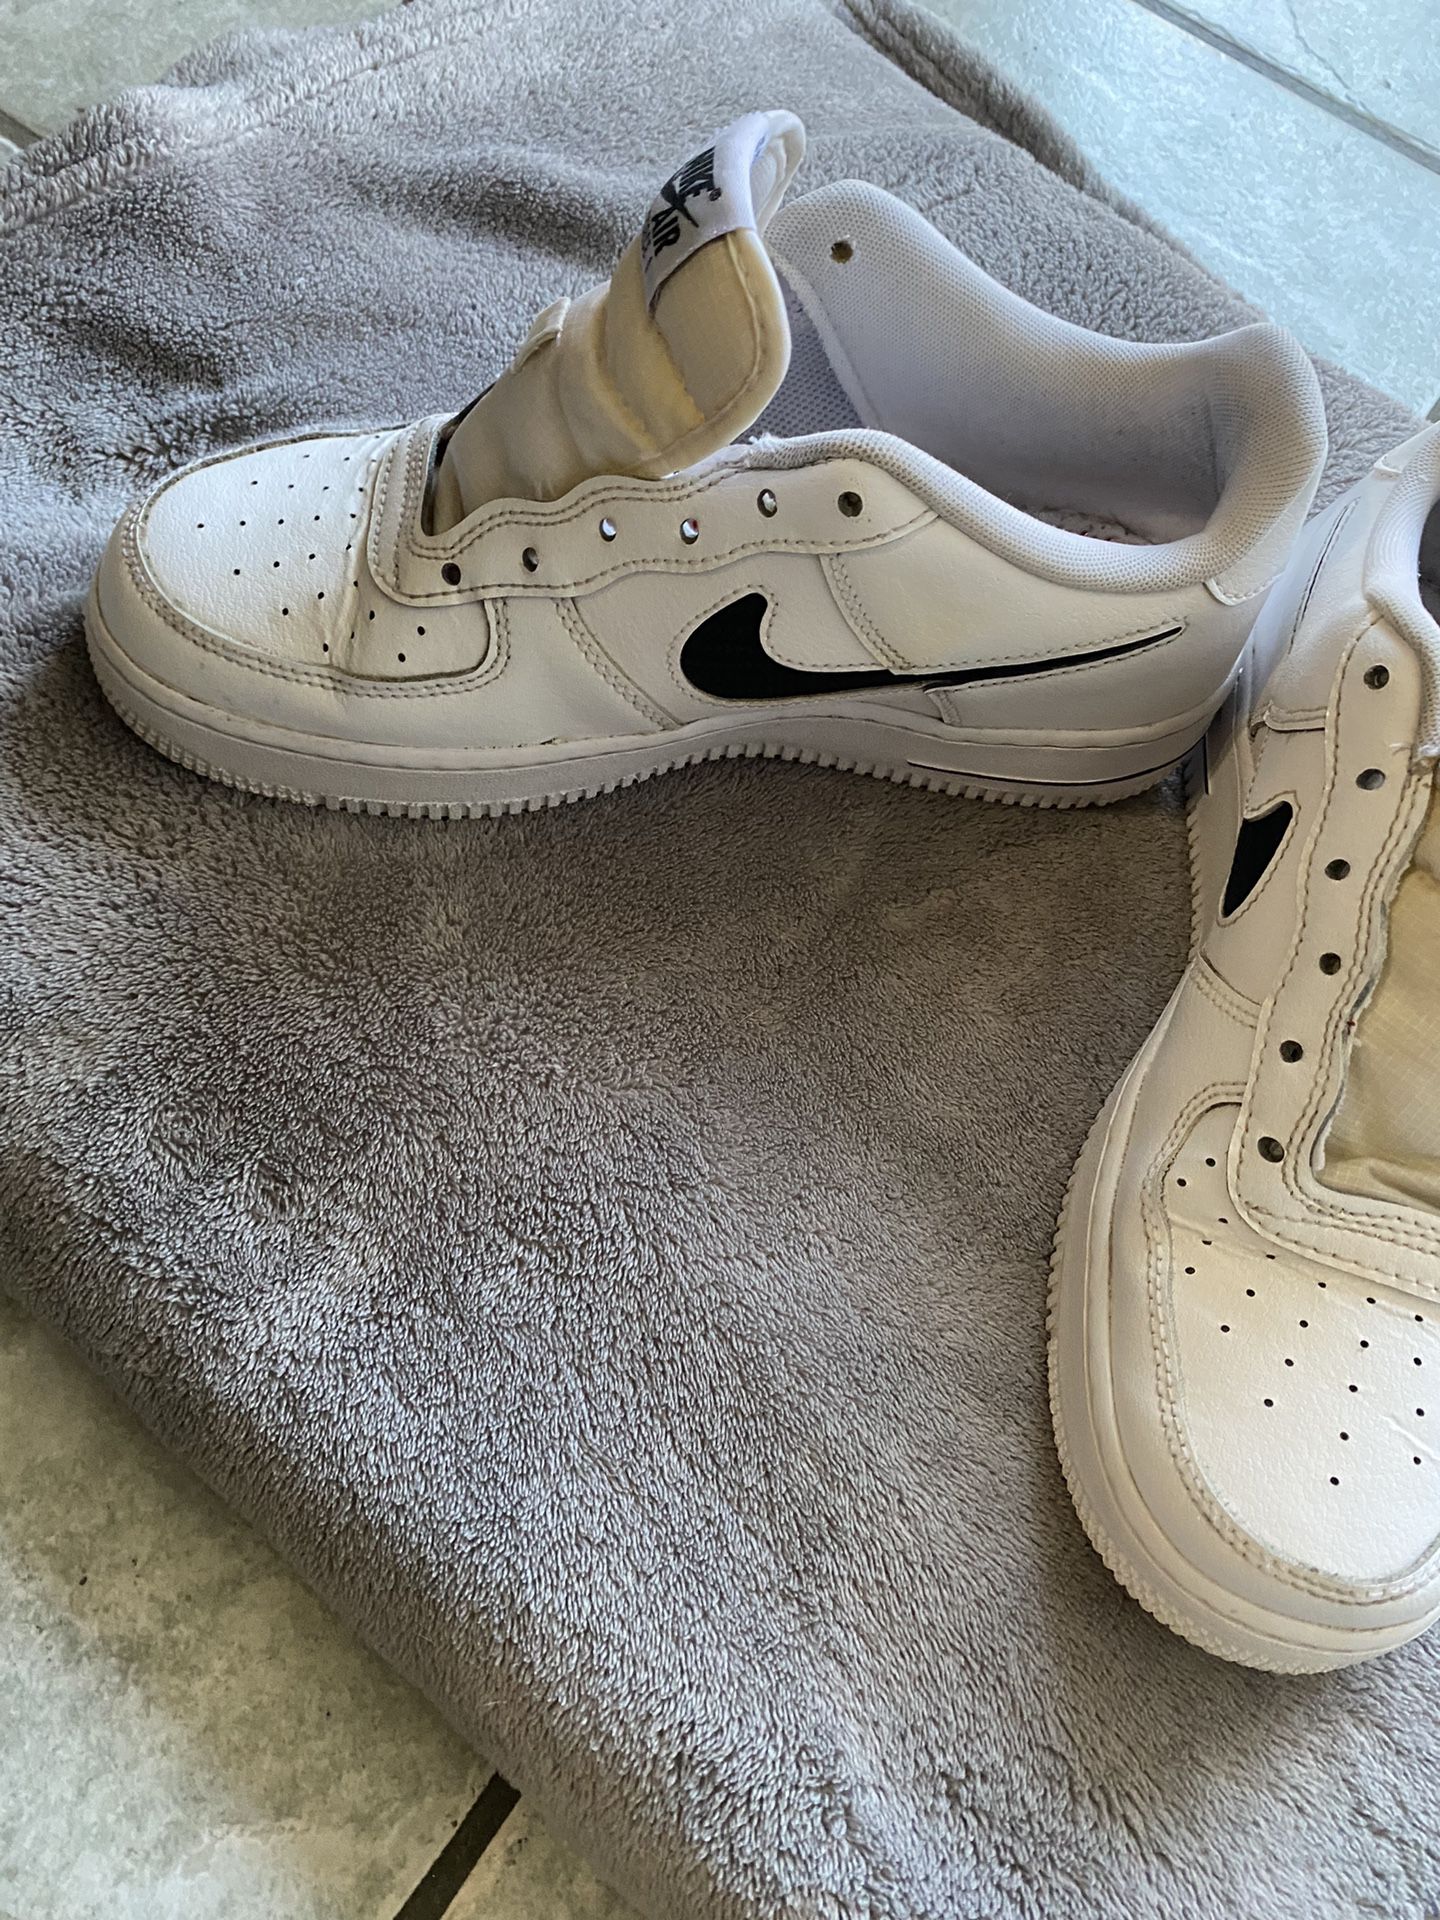 Af1 Custom Black And White Size 11 for Sale in Los Angeles, CA - OfferUp